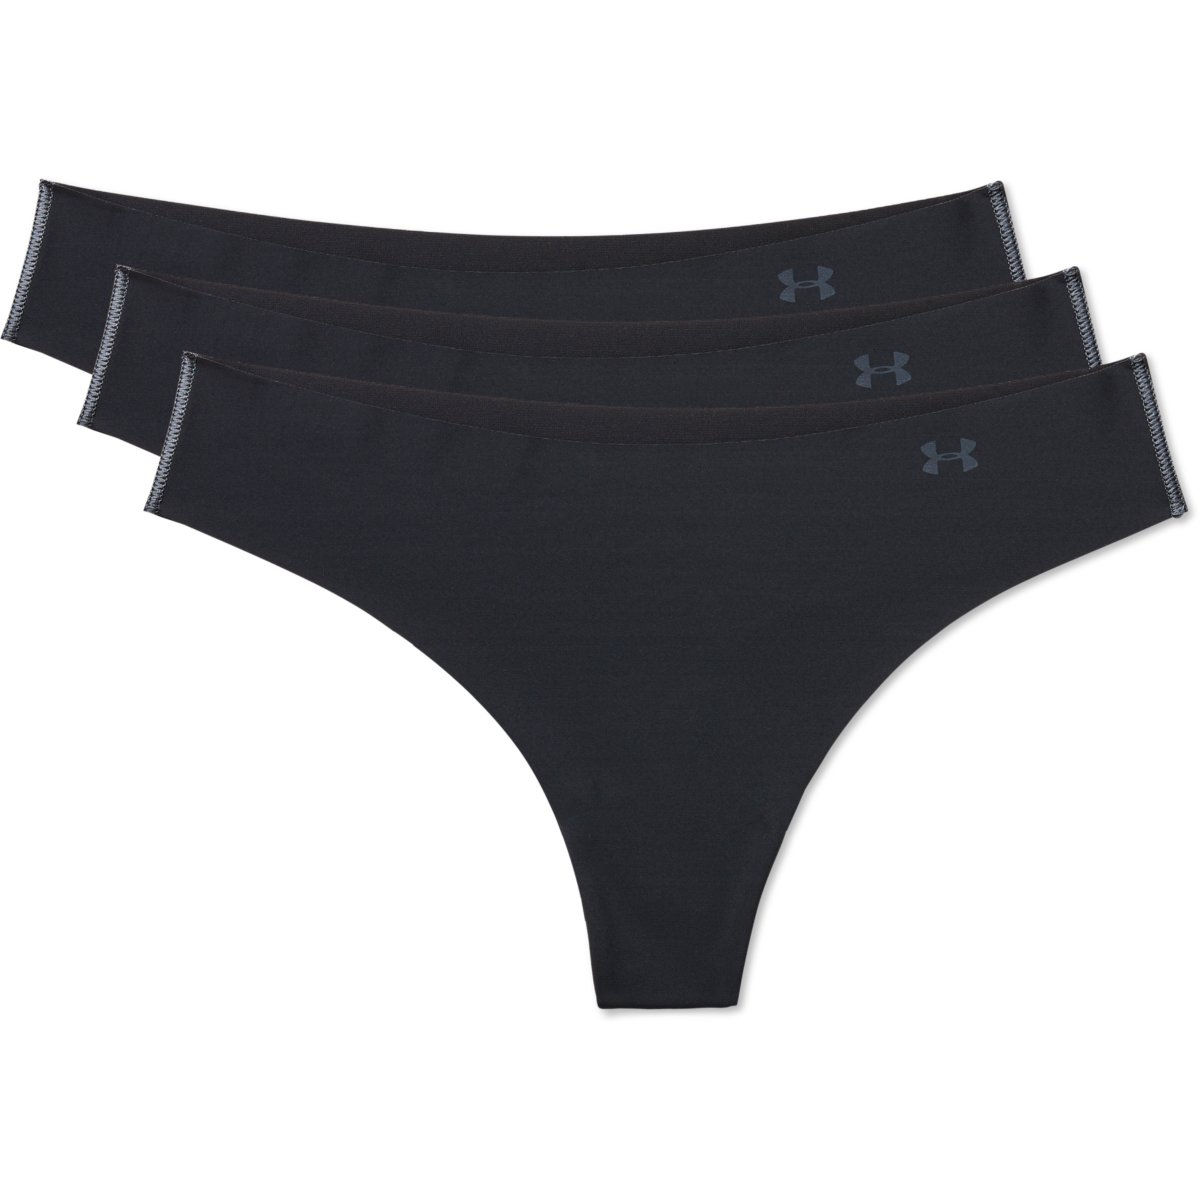 Tangas Under Armour PS para mujer (Lote de 3) - Ropa interior